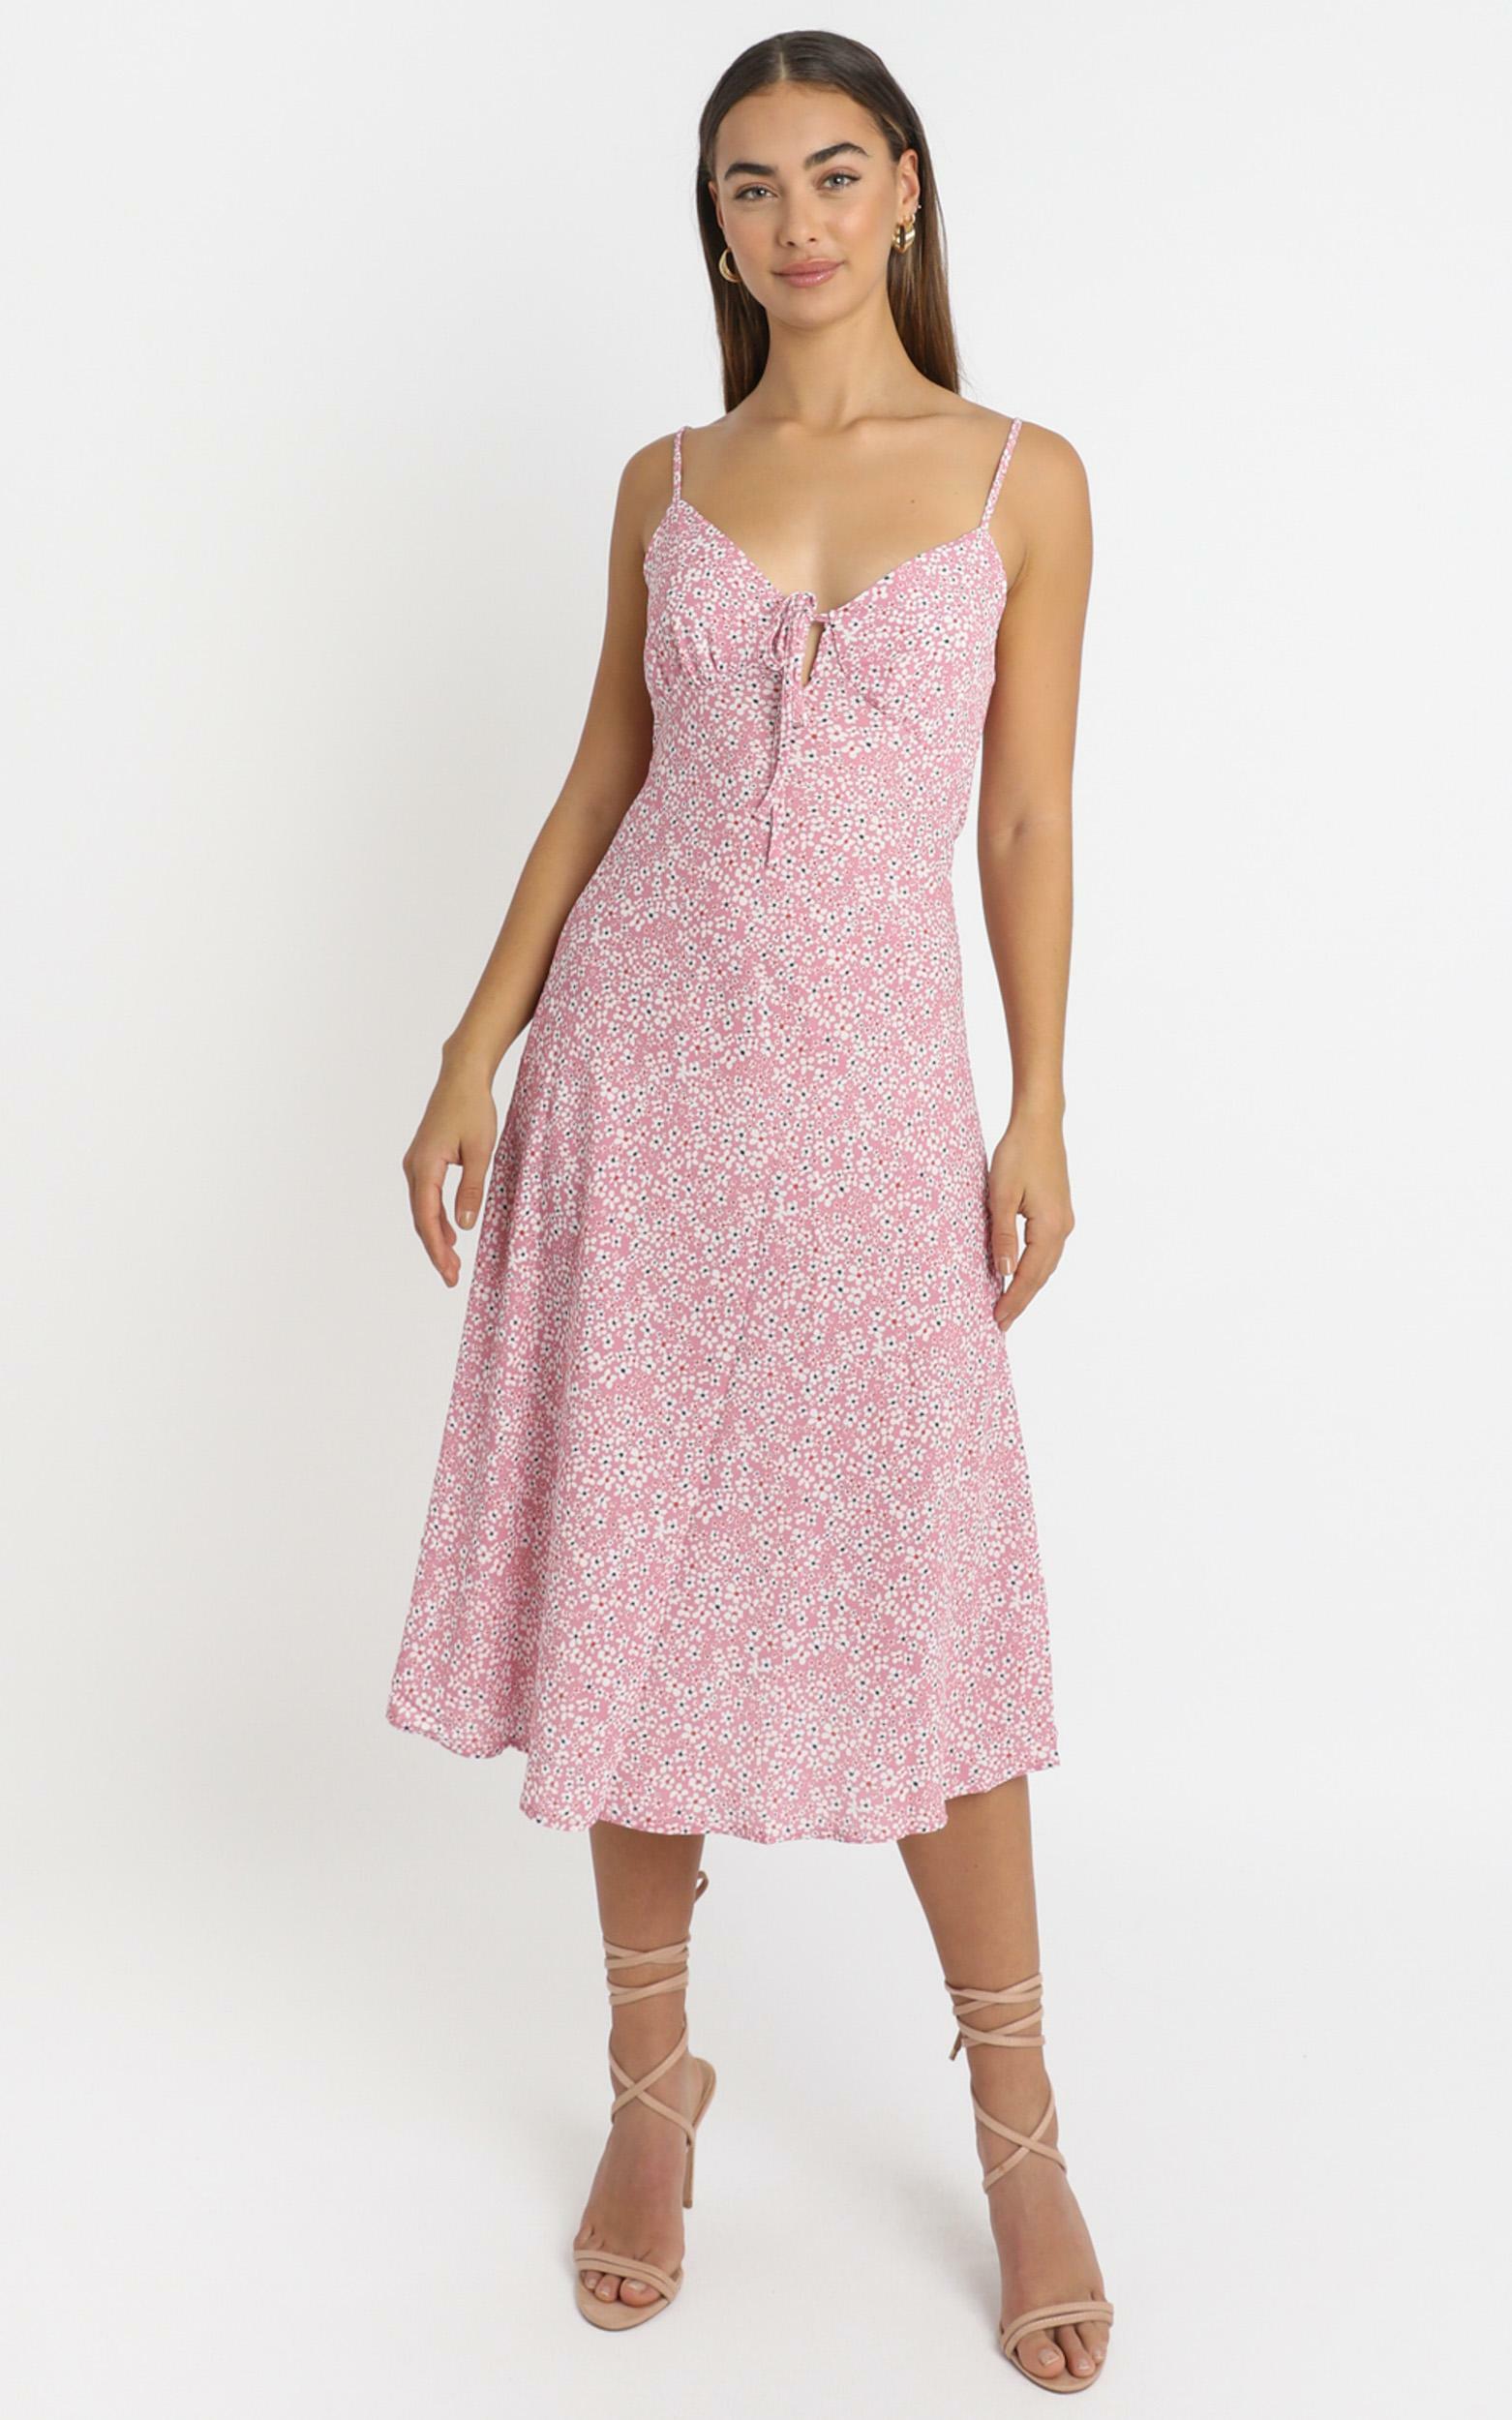 Toss The Dice dress in pink floral - 14 (XL), Pink, hi-res image number null